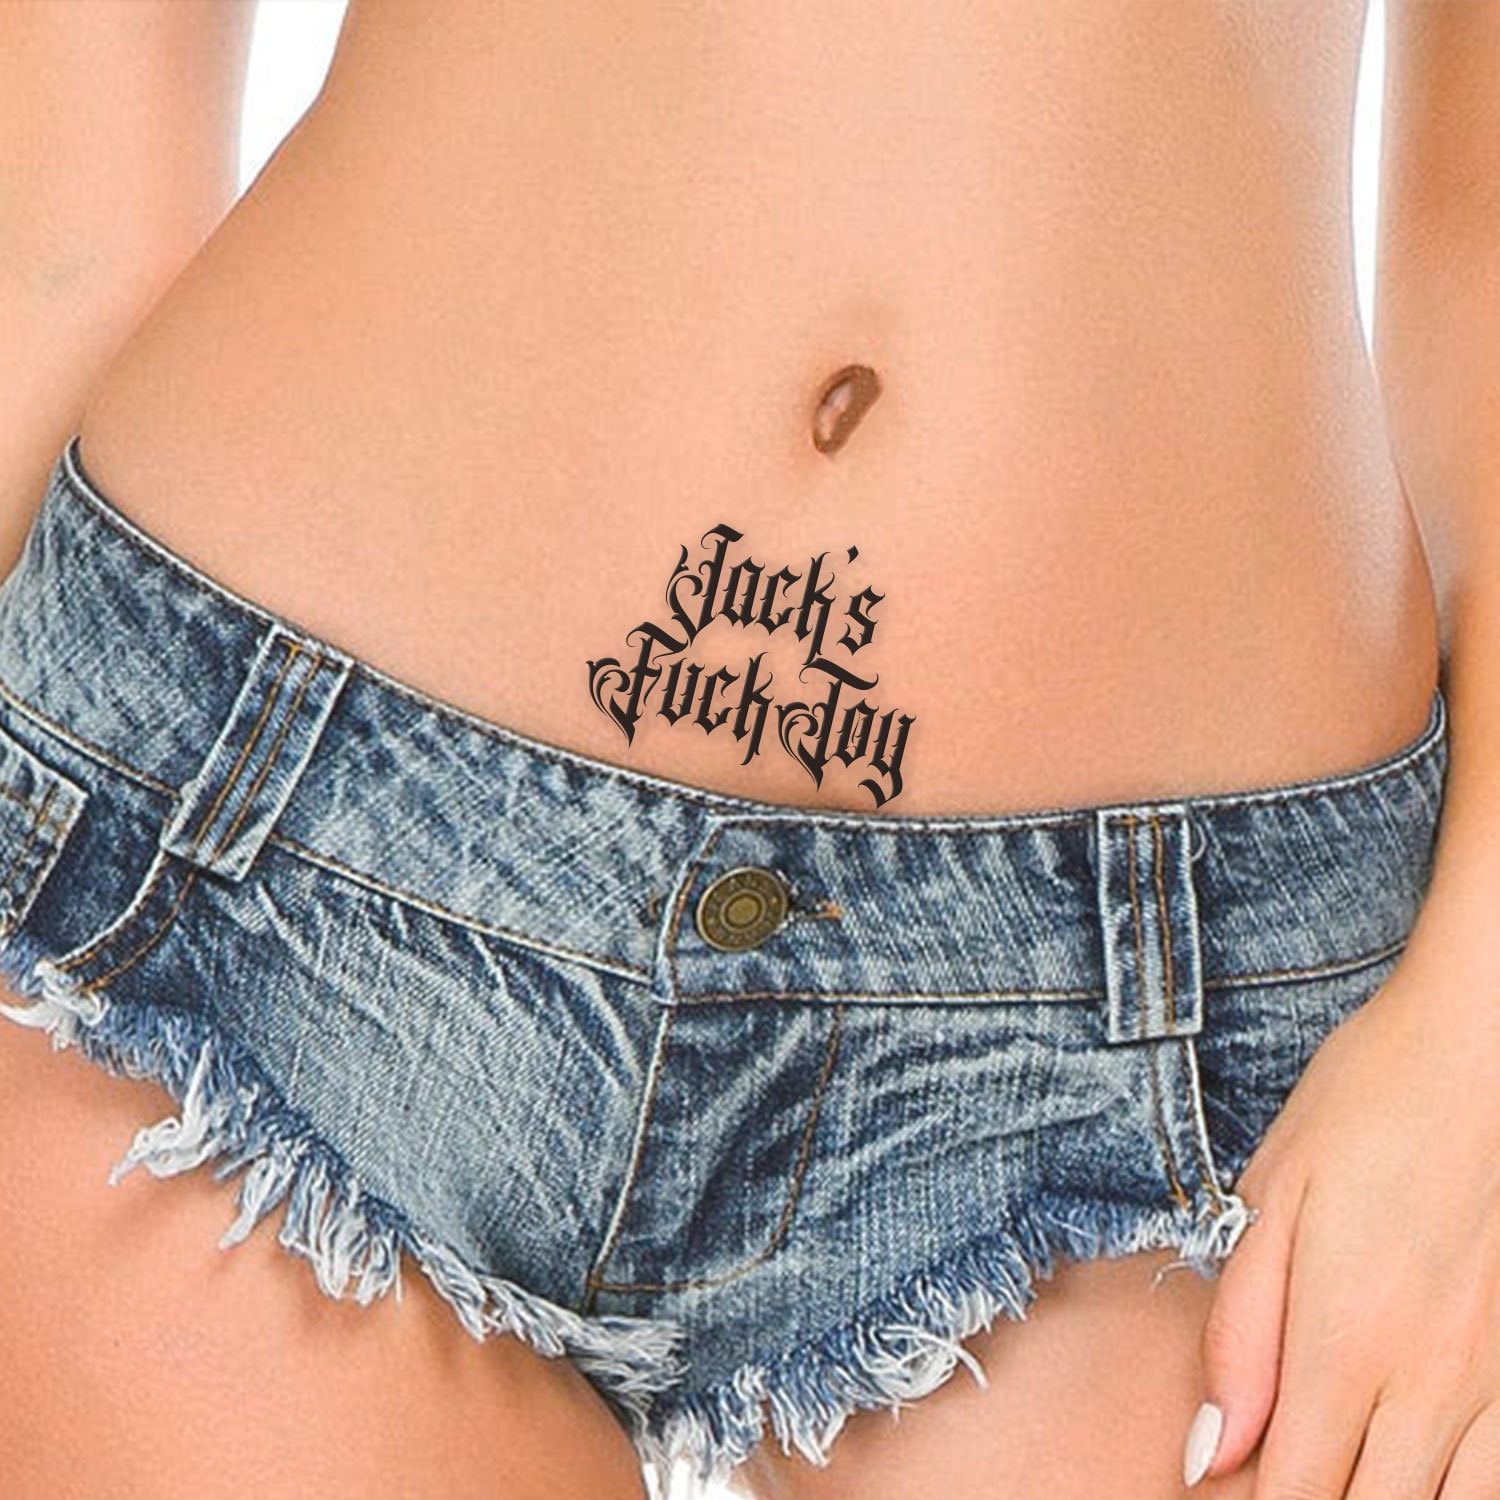 4x Personalised Adult Temporary Tattoos Tramp Stamps Owned image photo